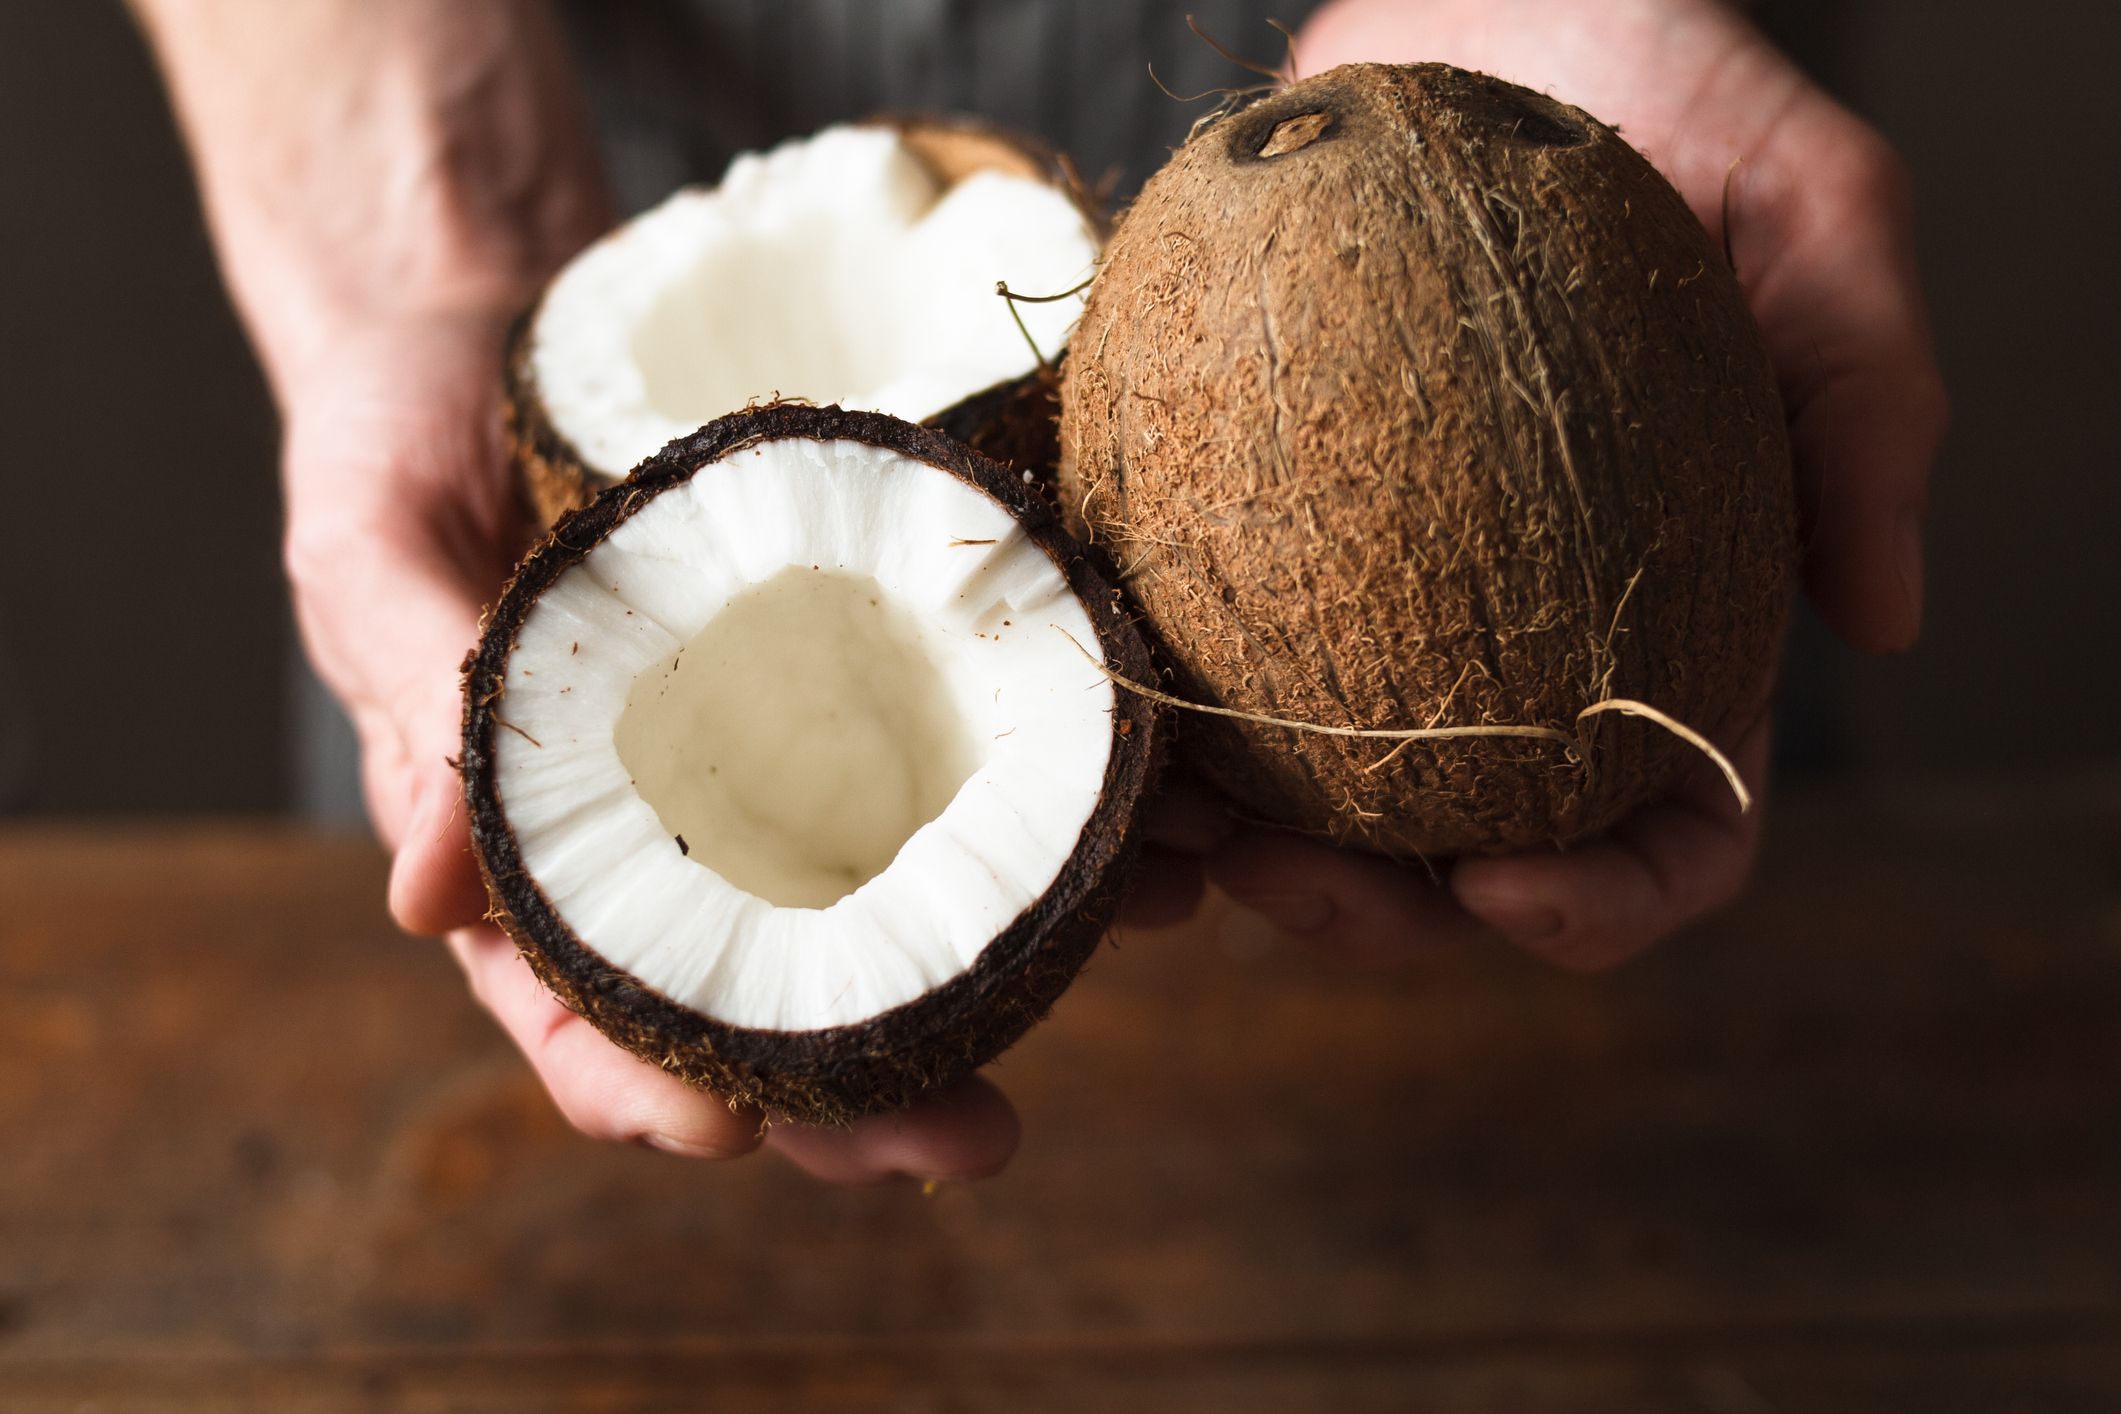 There are many health benefits associated with coconuts for men